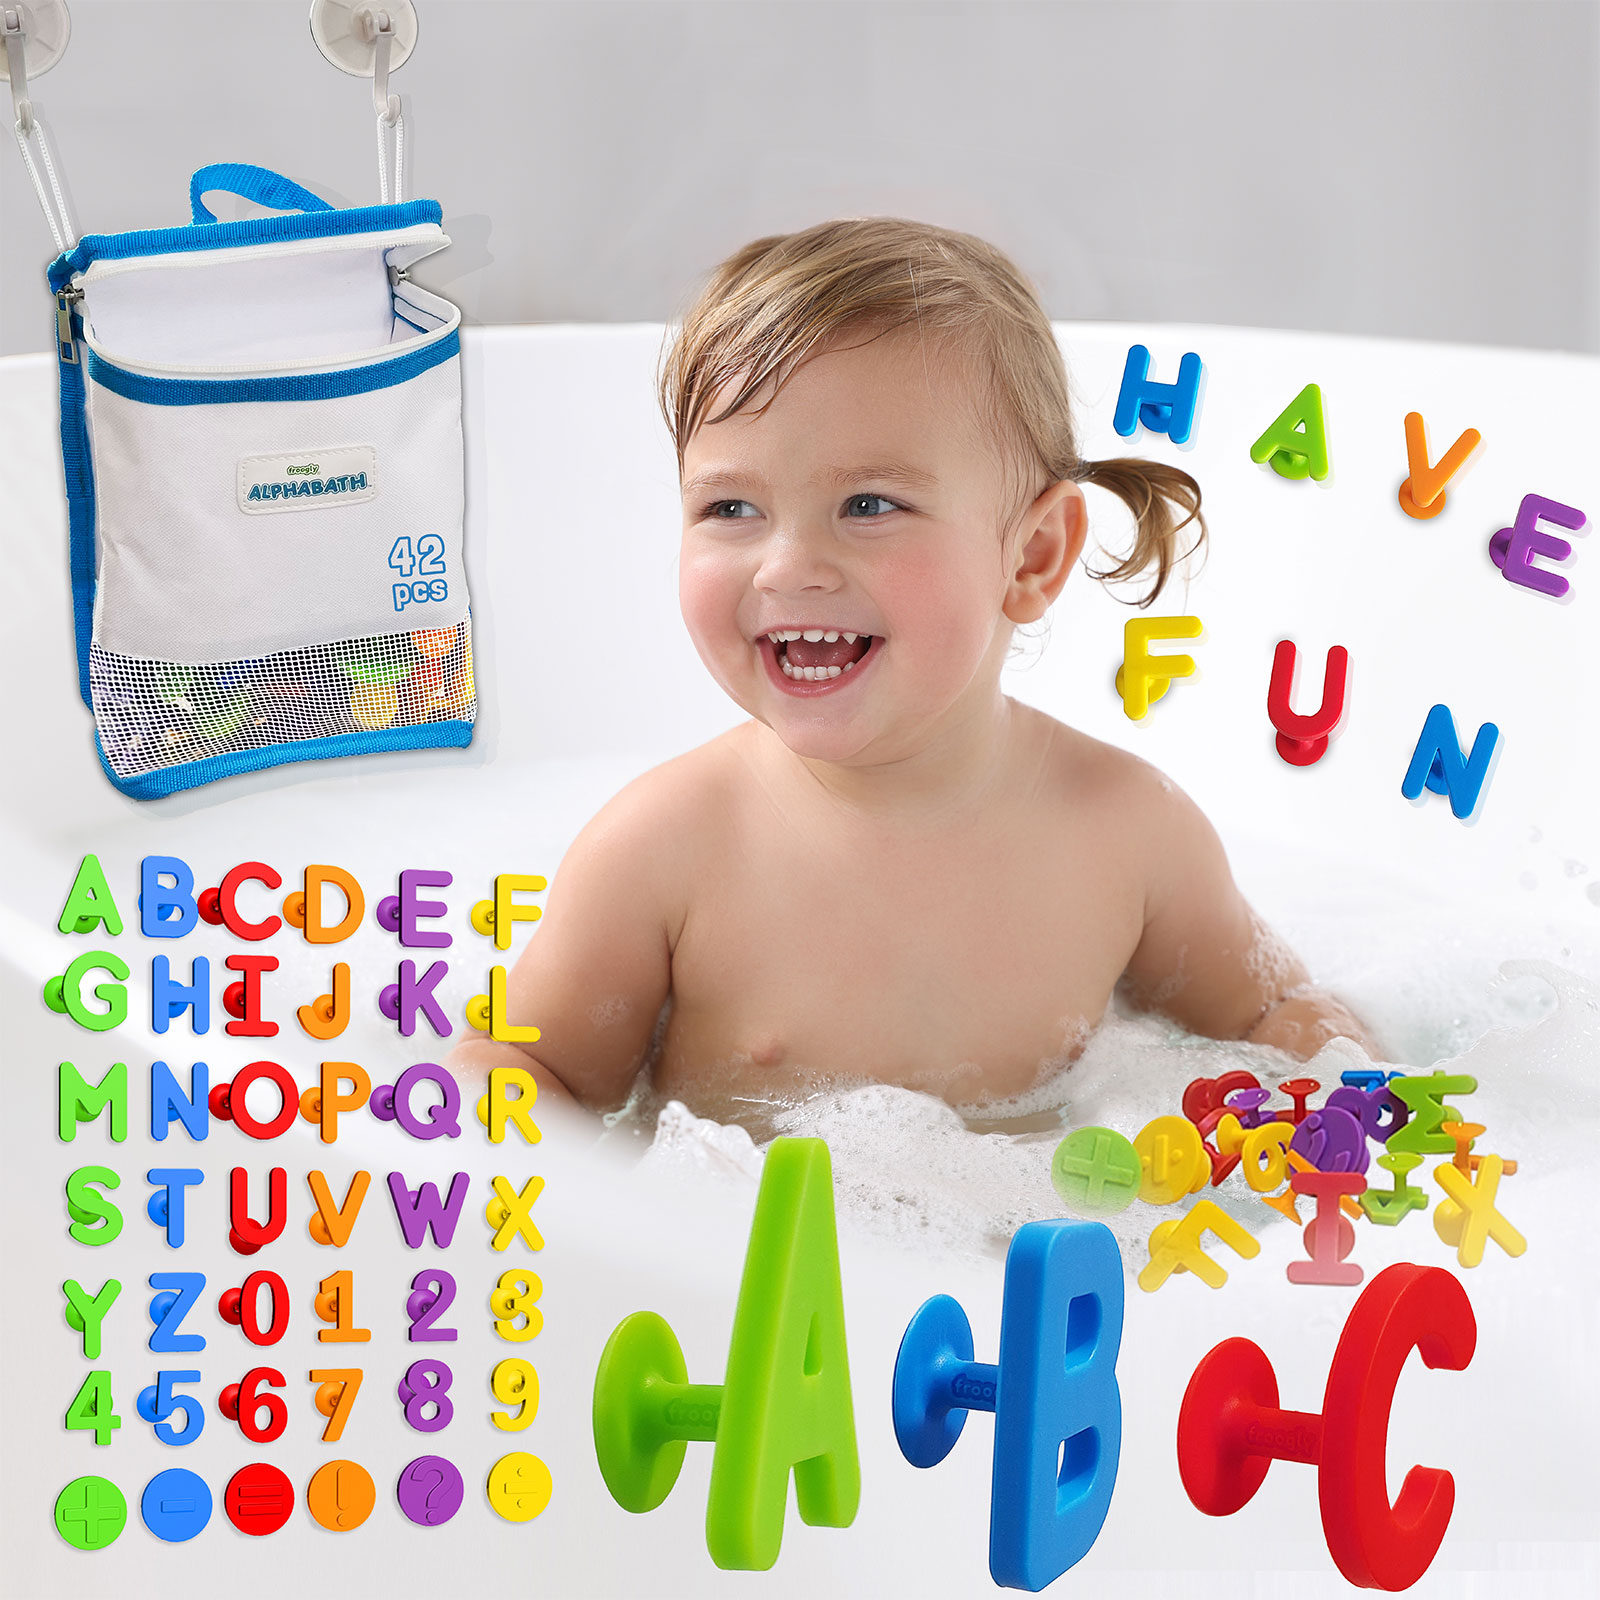 ALPHABATH - 42 pcs alphabet, numbers and signs - Educational Set